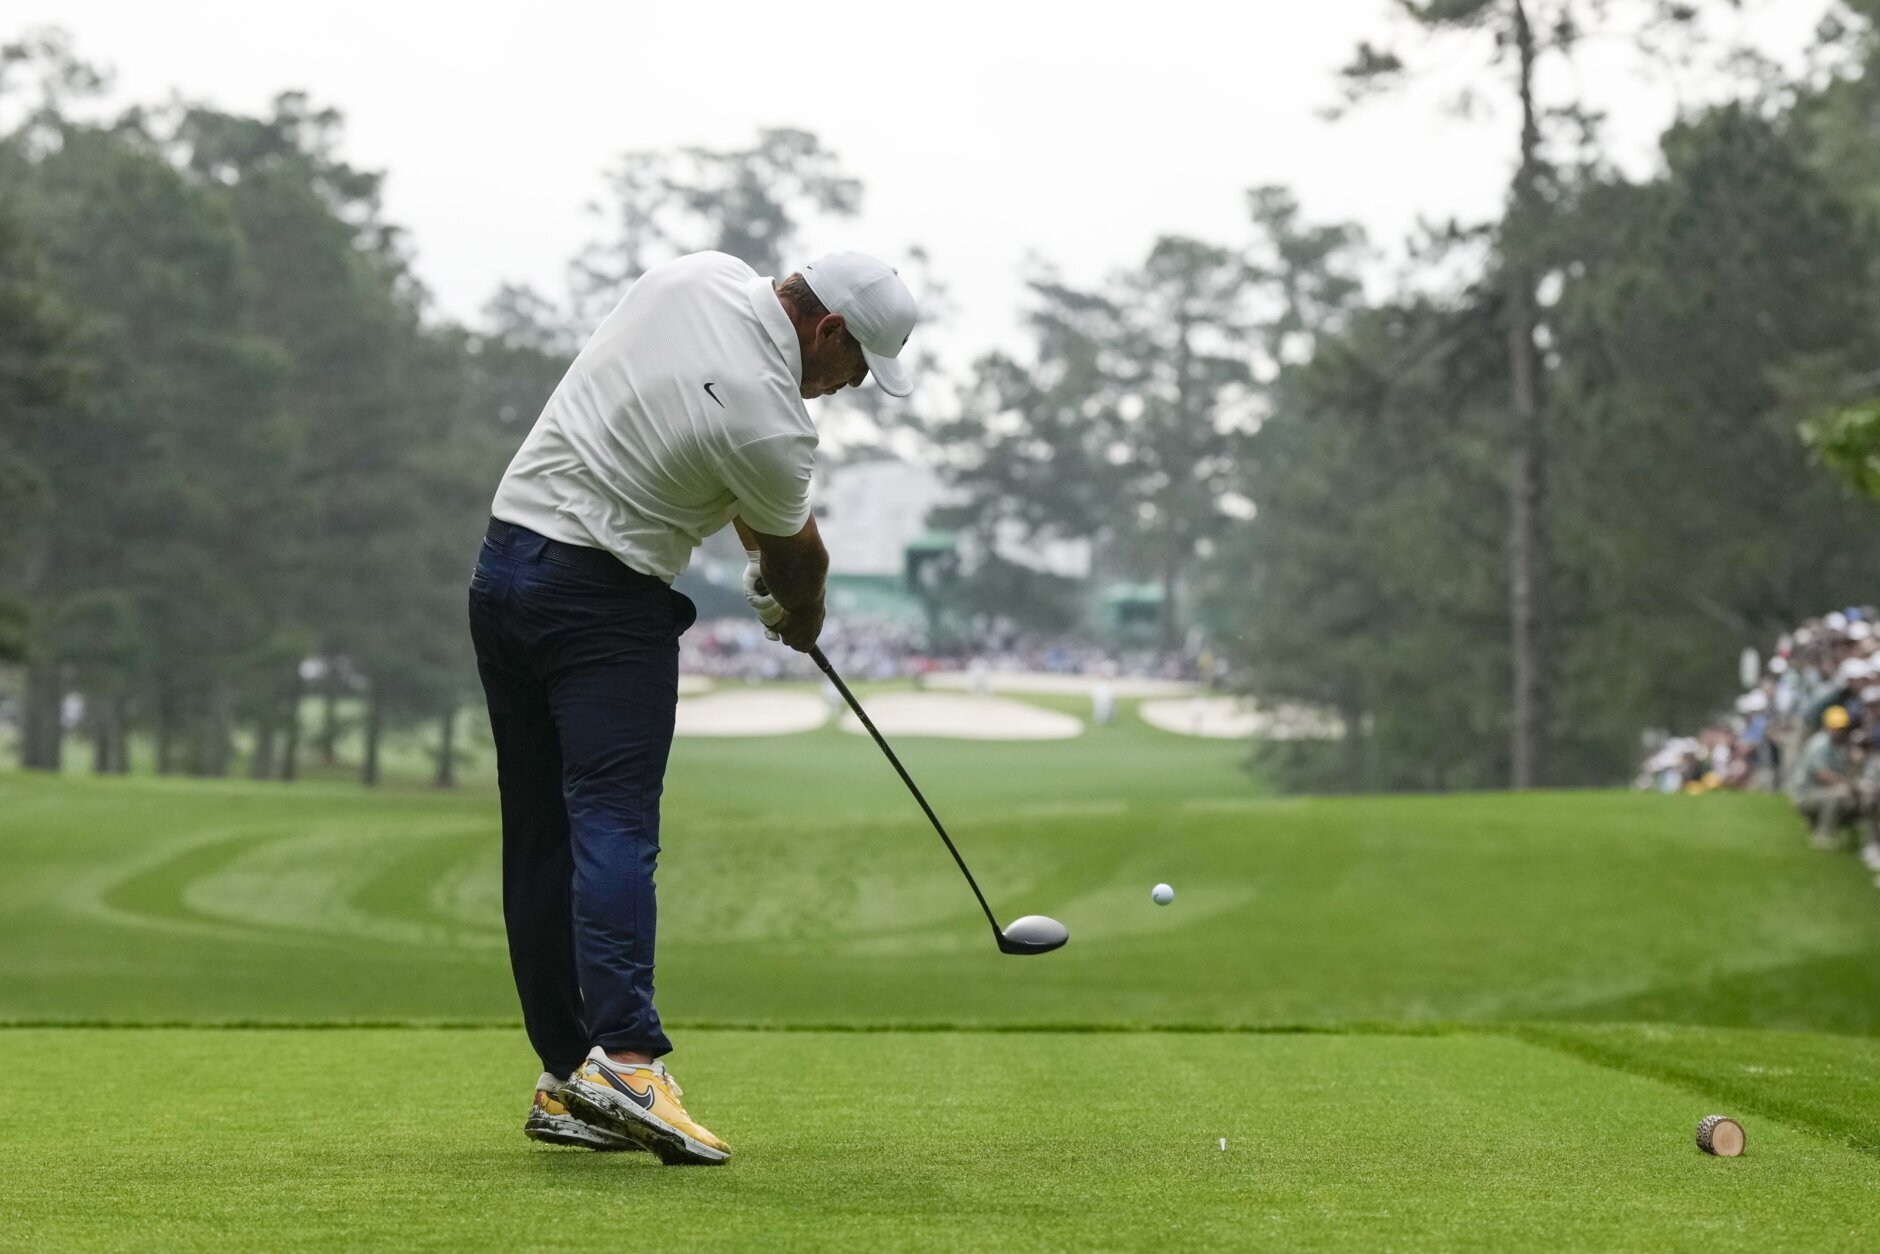 2023 Masters tee times for Friday's second round moved up 30 minutes.